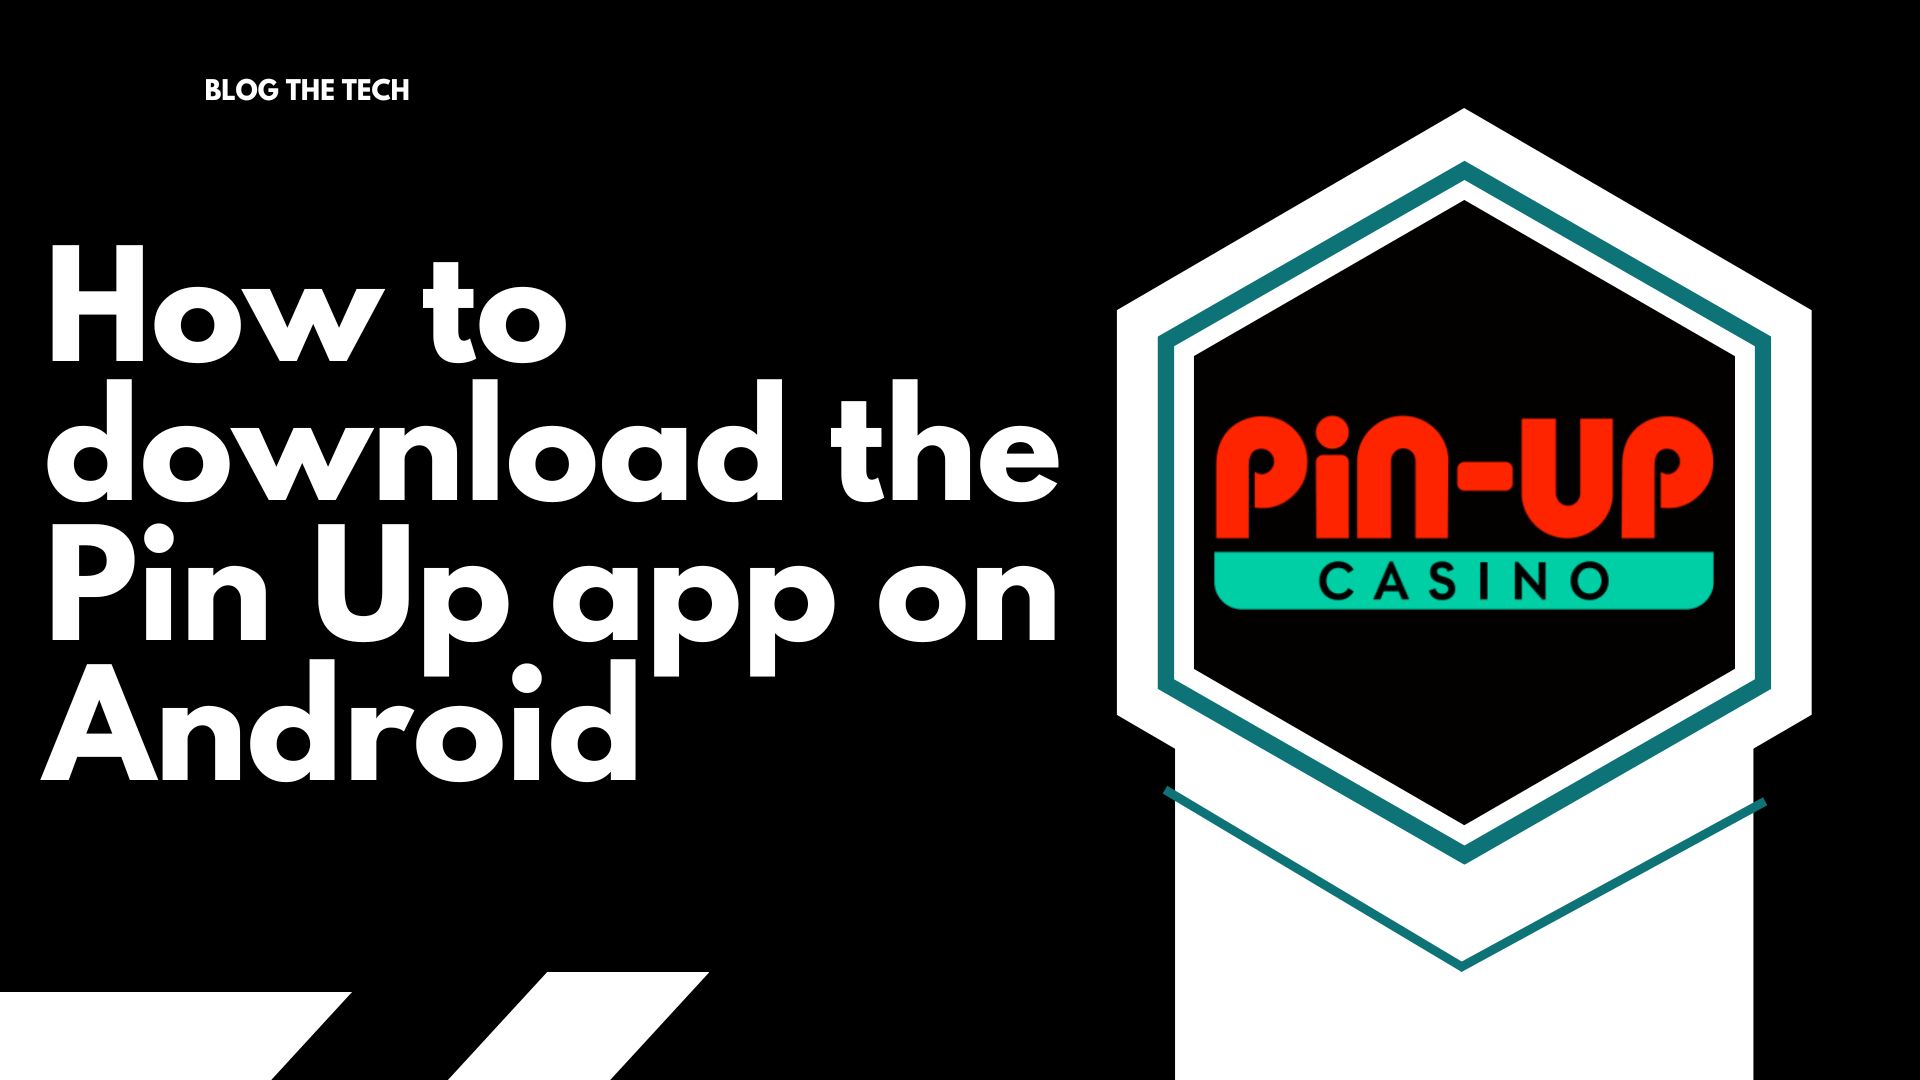 How to download the Pin Up app on Android